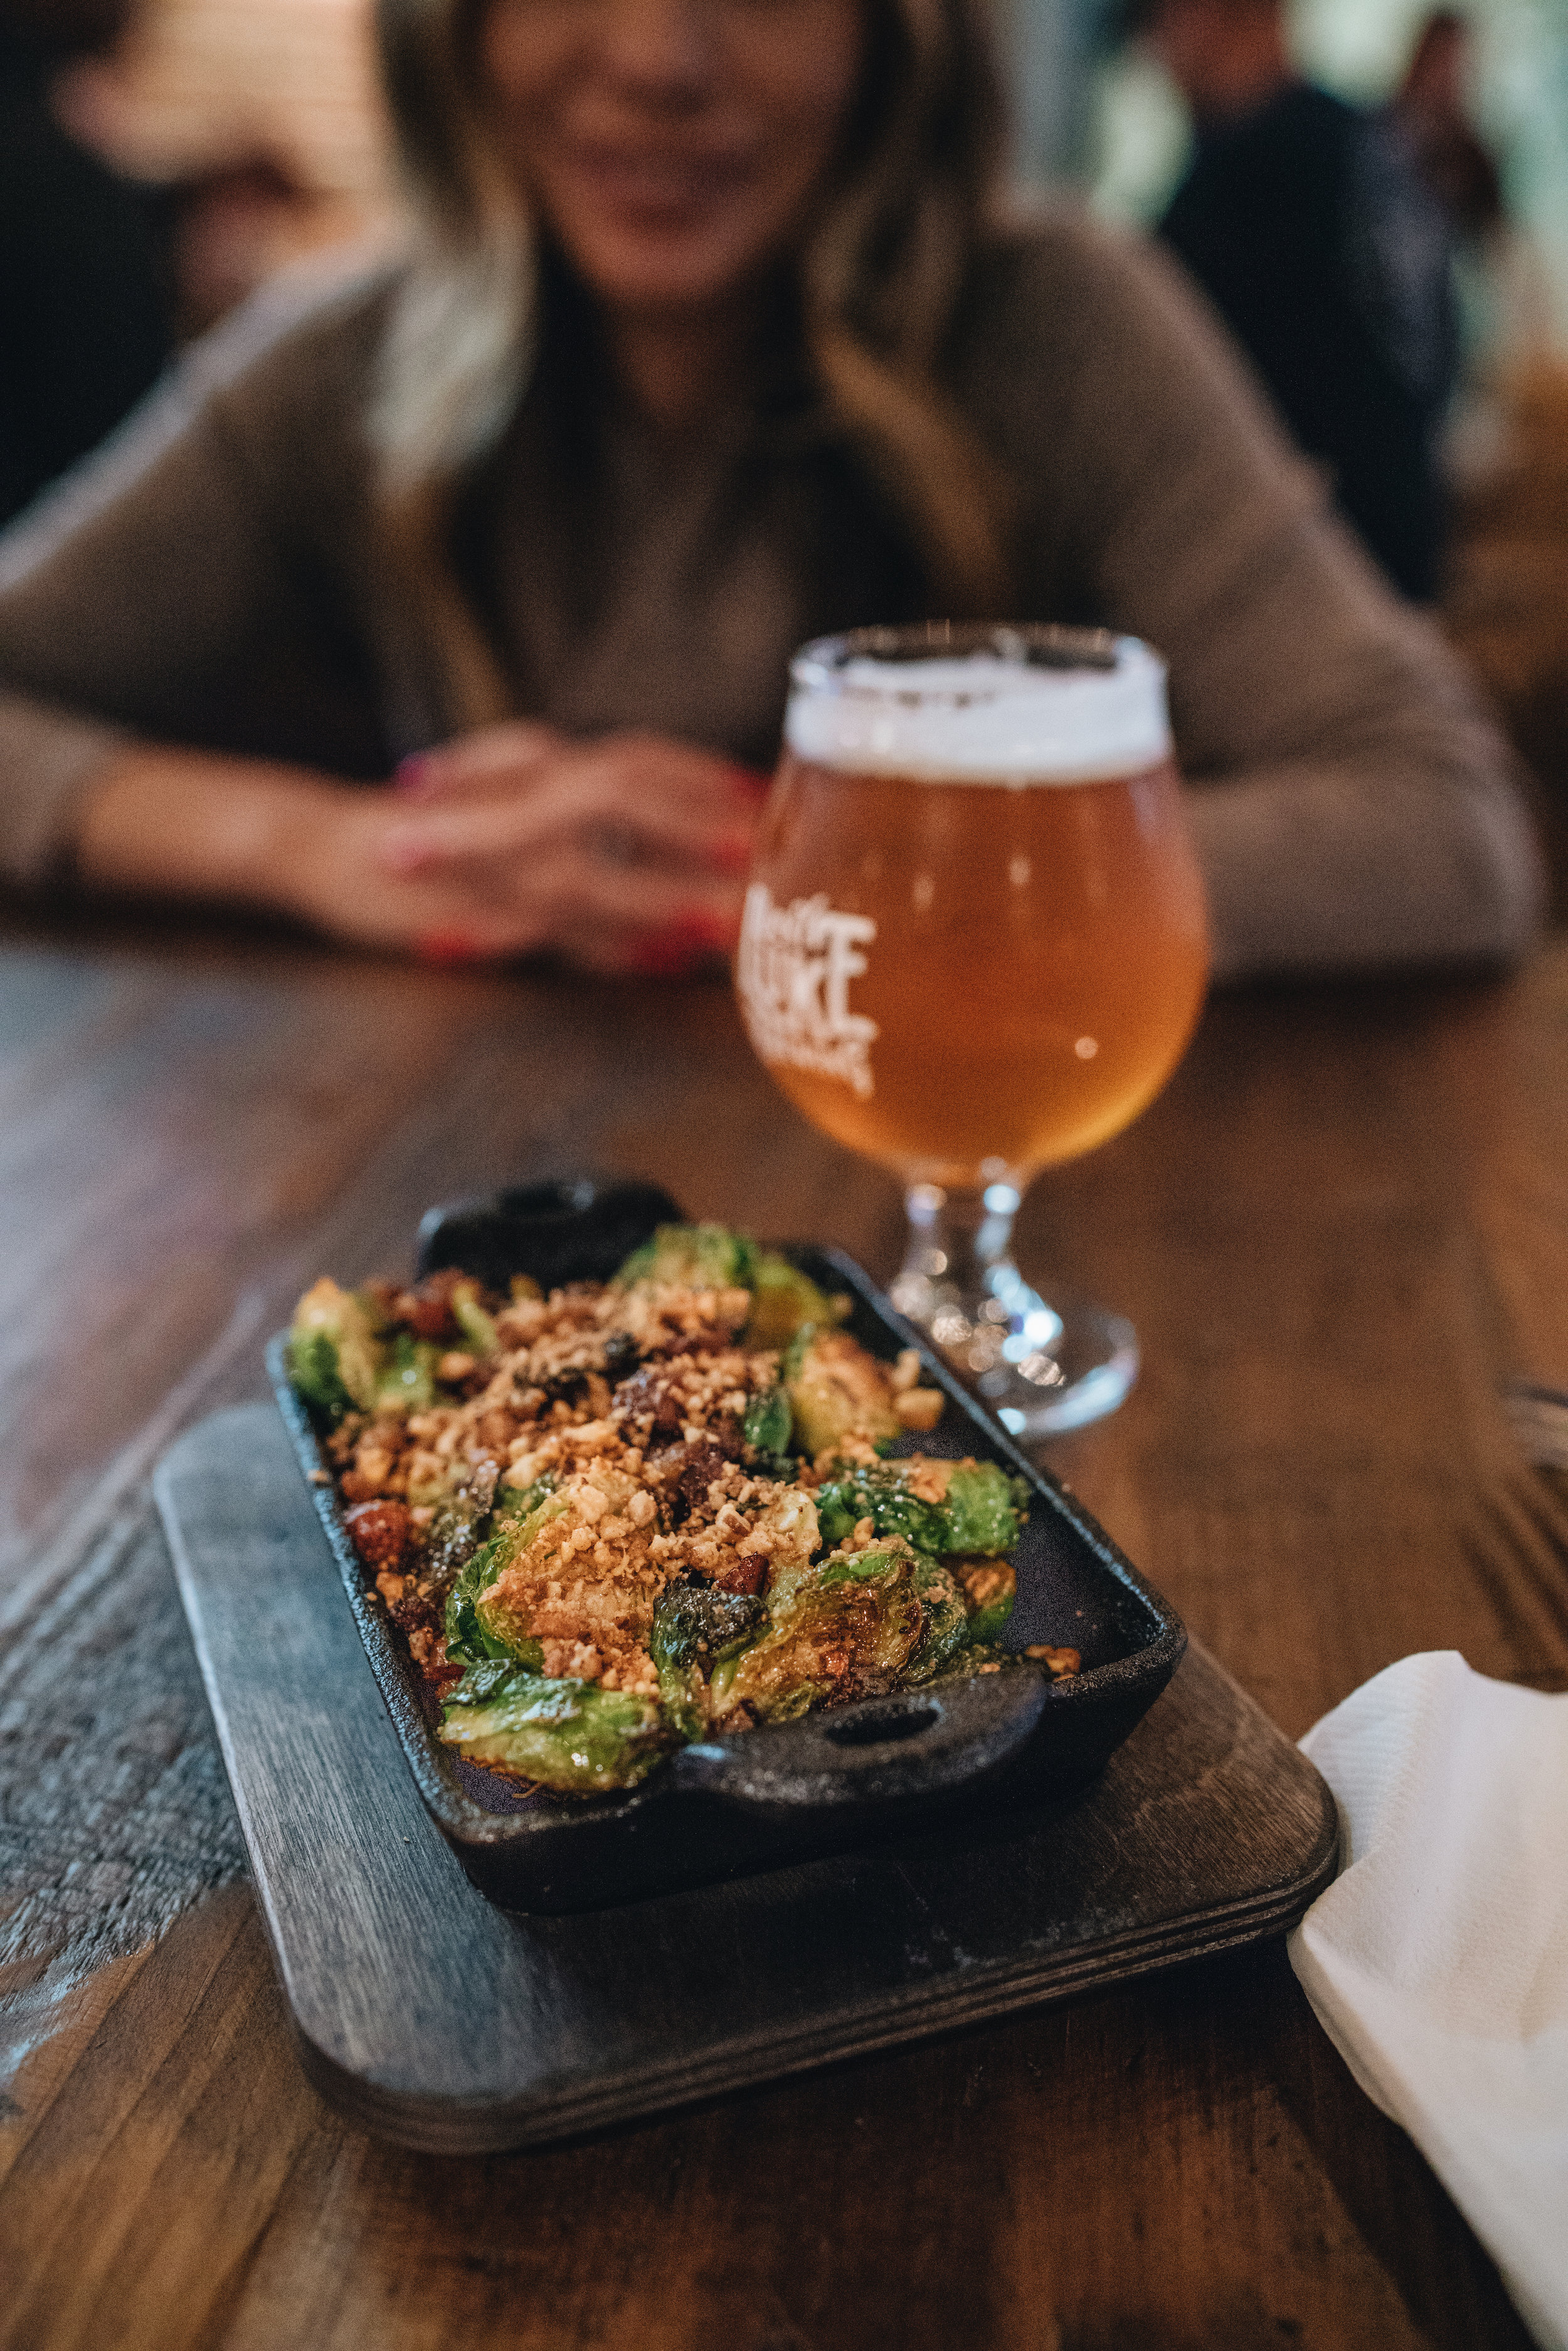  Lucky luke brewpub’s Pan roasted brussel sprouts enjoyed with a Lucky Luke IPA 